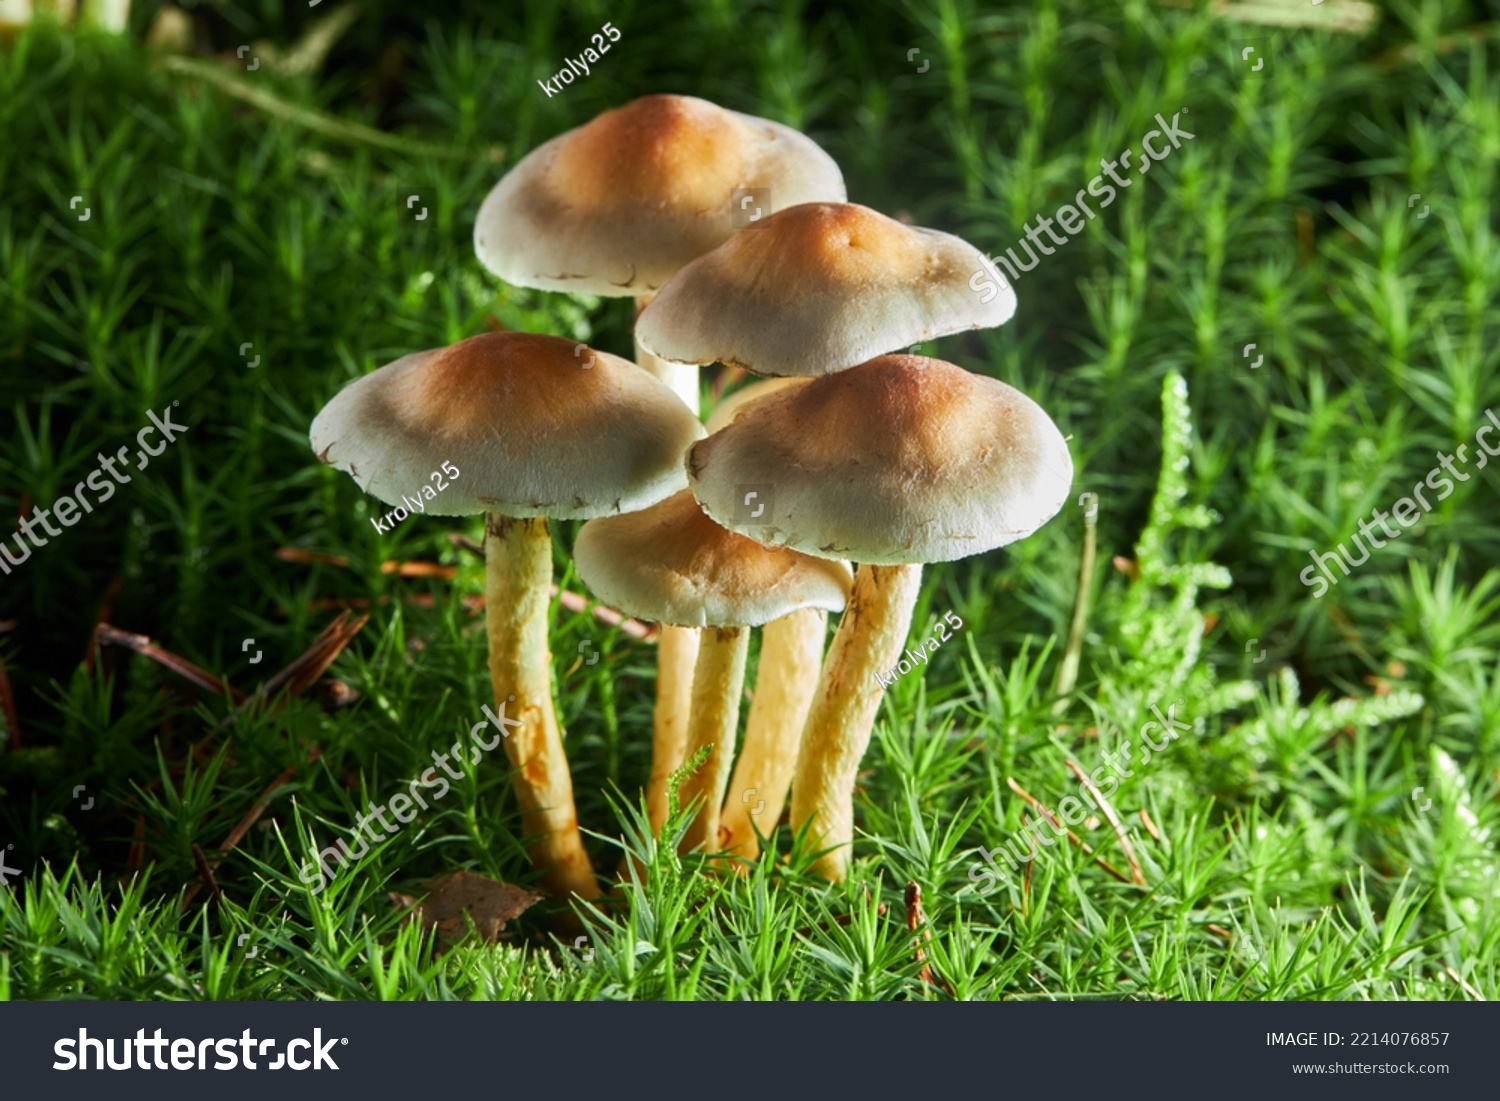 Inedible sulfur tuft or clustered woodlover. Hypholoma fasciculare, sulphur tuft or clustered woodlover. Poisonous mushrooms growing in green moss on fallen tree trunk #2214076857